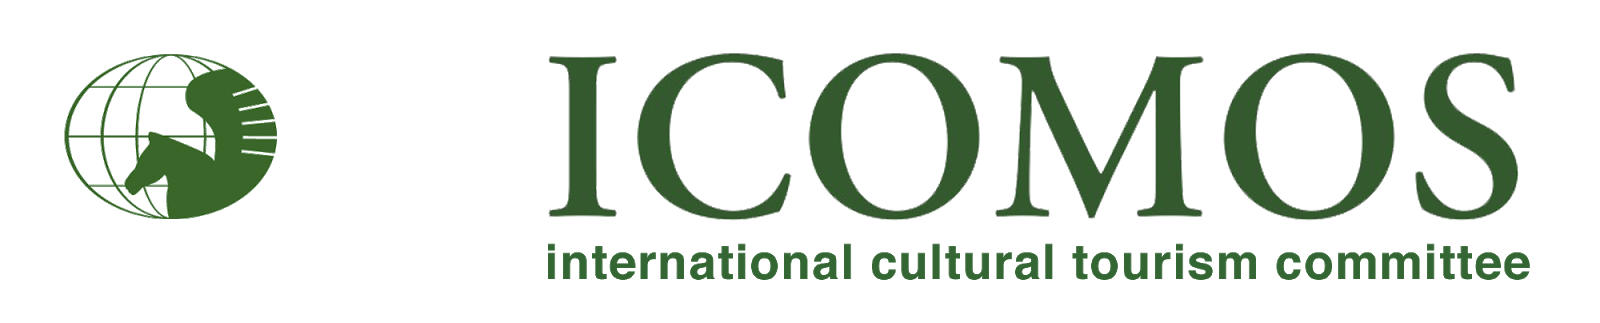 ICOMOS Cultural Tourism | International Cultural Tourism Committee (ICTC)